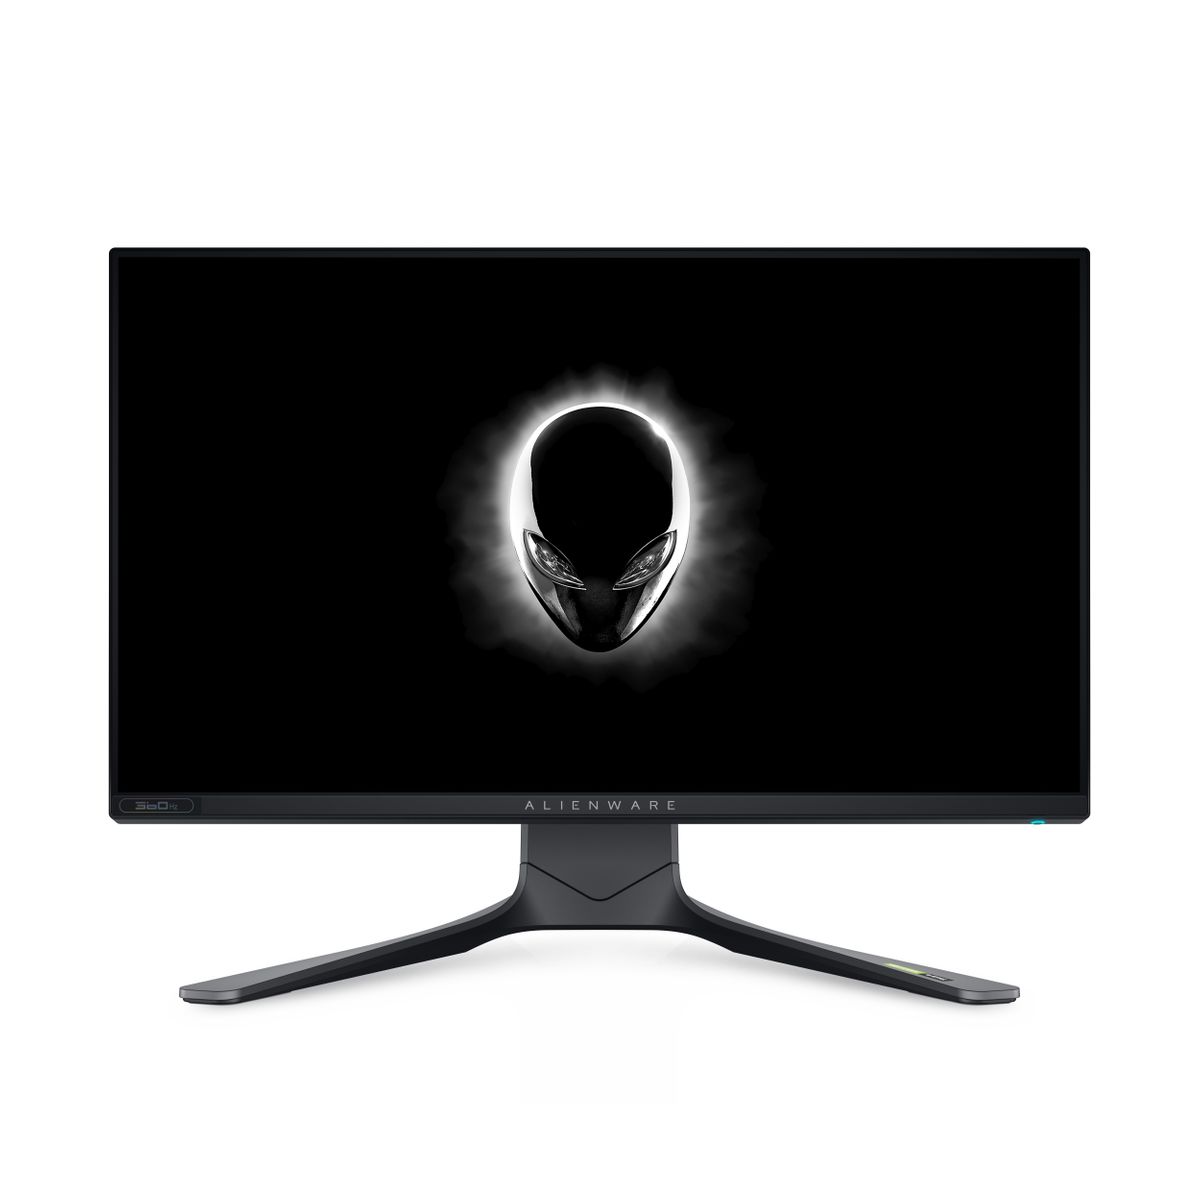 Alienware Gaming Monitor, AW2521H, 24.5 Zoll, LED LCD, IPS, 1ms, 360Hz, 400cd/m², DP, Mini DP, USB-A, HDMI, Audio out, NVIDIA G-SYNC, 3Jahre DELL Austauschservice, Dark Side of the Moon Dark Side of the Moon 25 Zoll 1920 x 1080 LED LCD IPS 